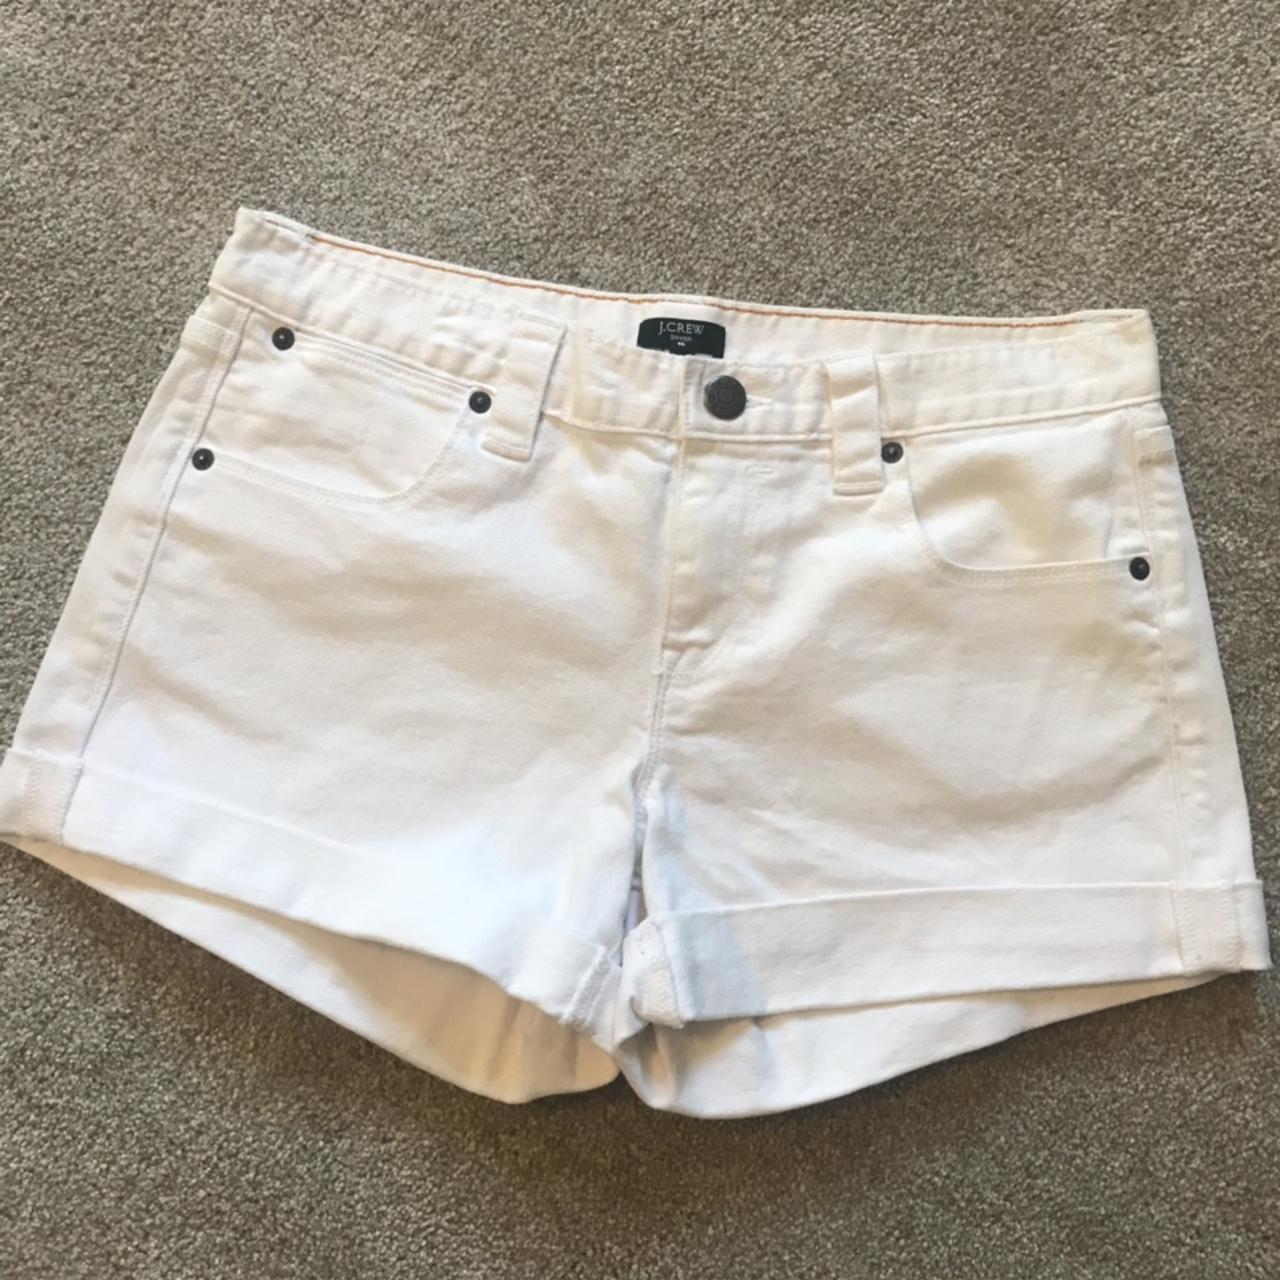 J Crew white shorts. These shorts are really good... - Depop